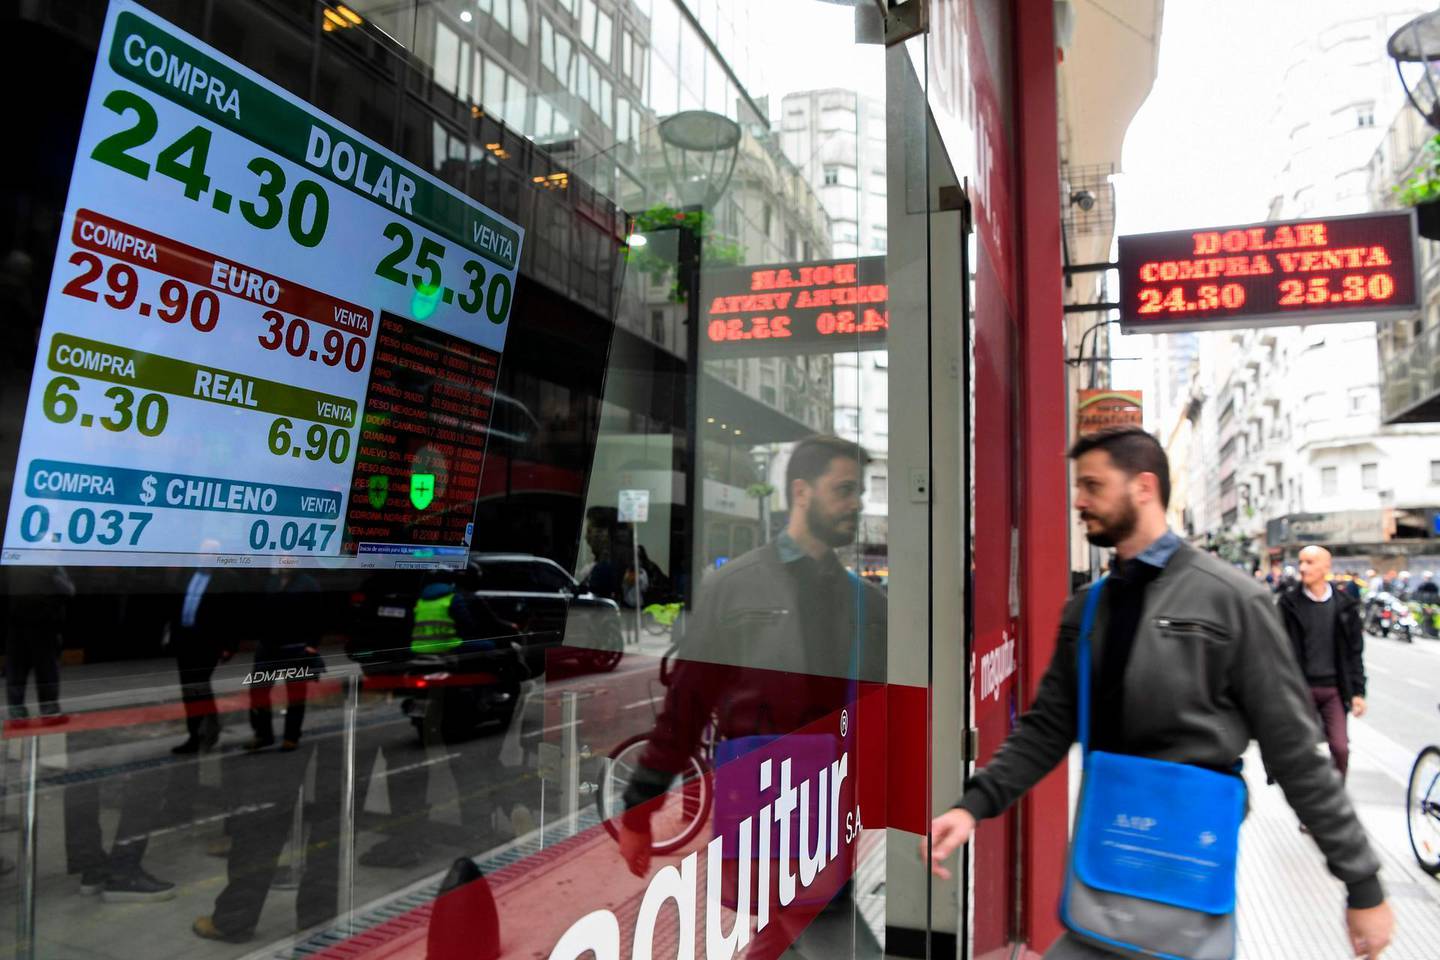 Currency exchange values are displayed in the buy-sell board of a bureau de exchange in Buenos Aires, on May 14, 2018. Argentina's peso plummeted by more than 6 percent on Monday, sparking new inflation fears for Latin America's third-largest economy. The currency fell 6.6 percent to trade at 25.20 against the dollar as markets opened. / AFP / Eitan ABRAMOVICH
